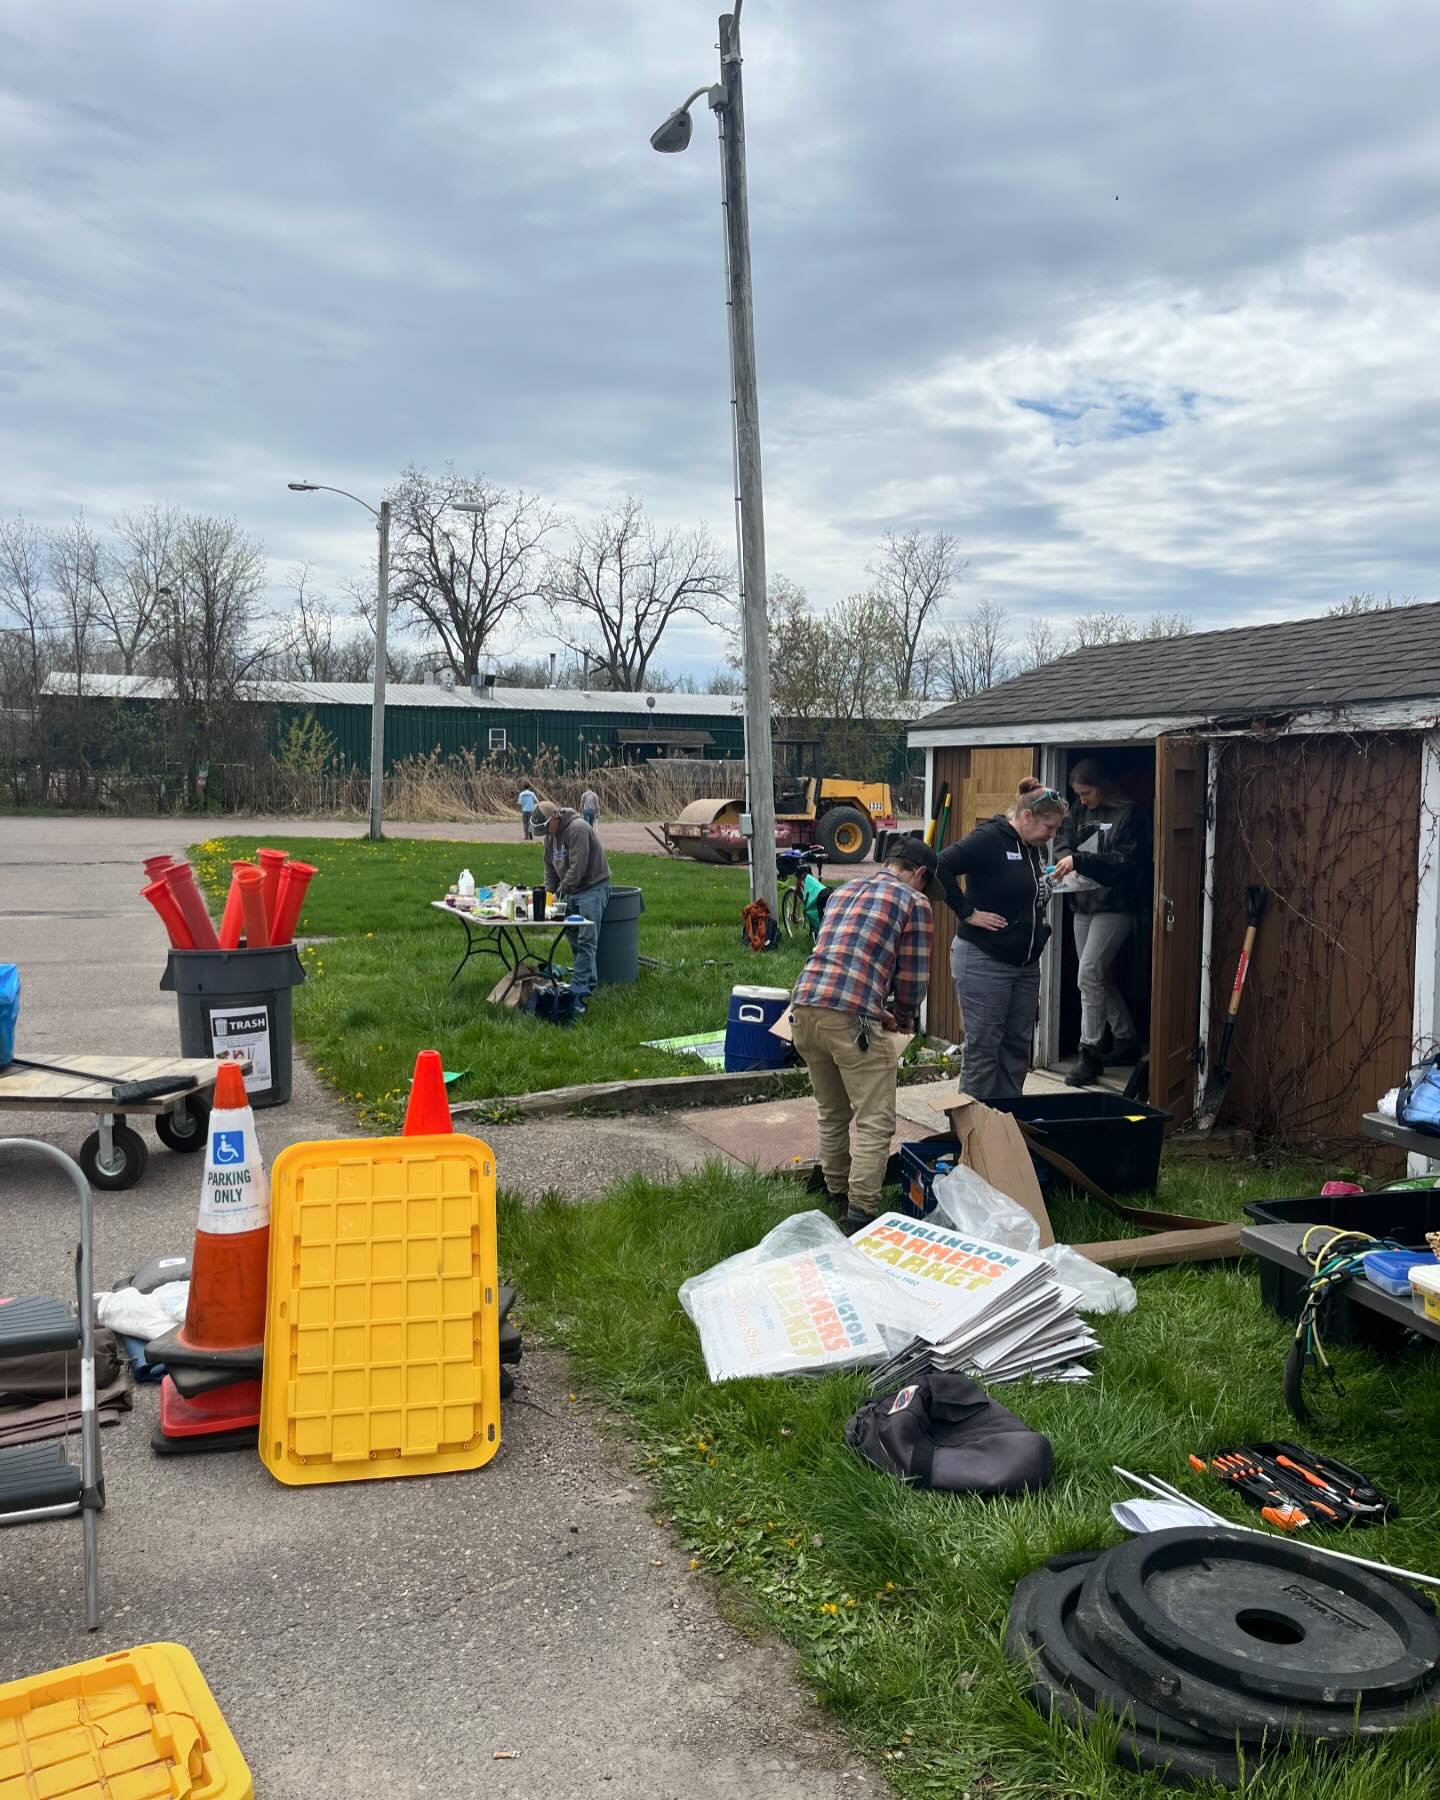 Today was an epic day getting market infrastructure up and running for summer season! Picnic tables were mended, bike racks assembled, the shed was cleaned out, and so much more organizing and sorting. 

We&rsquo;re so grateful to all of our vendors 